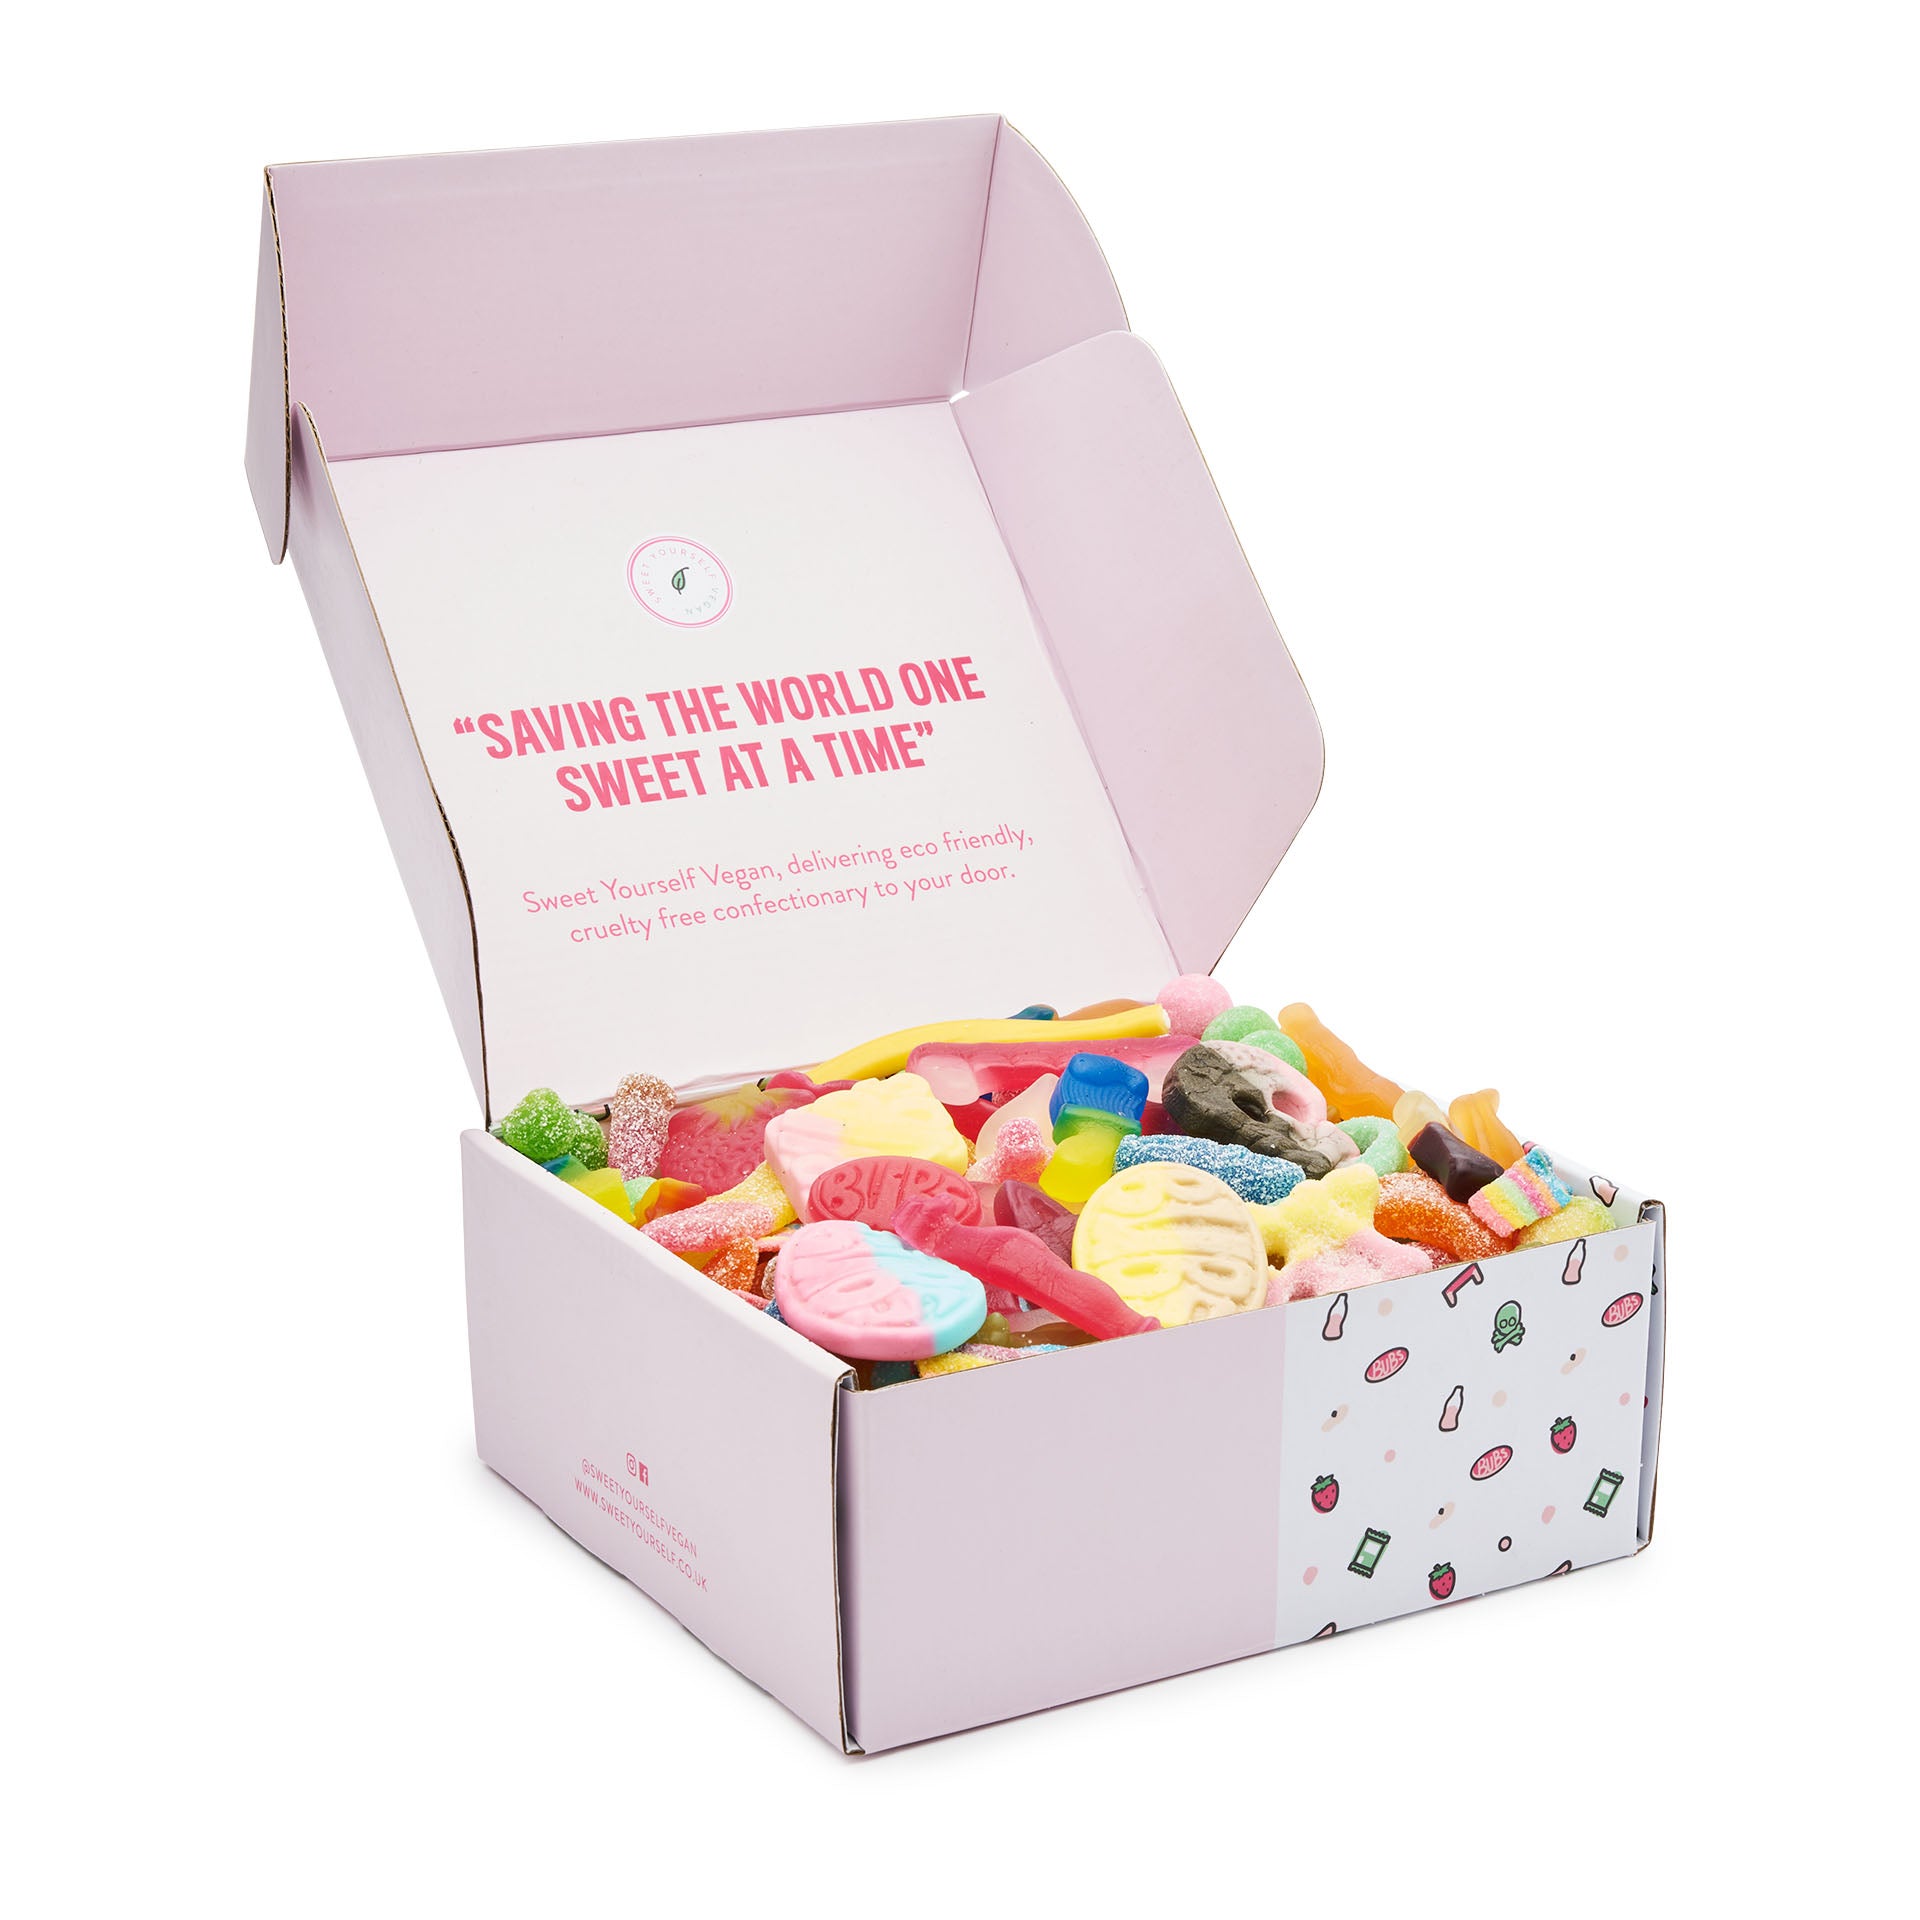 The All-Rounder Fizz + Non-Fizz Box Sweet Box Sweet Yourself Vegan